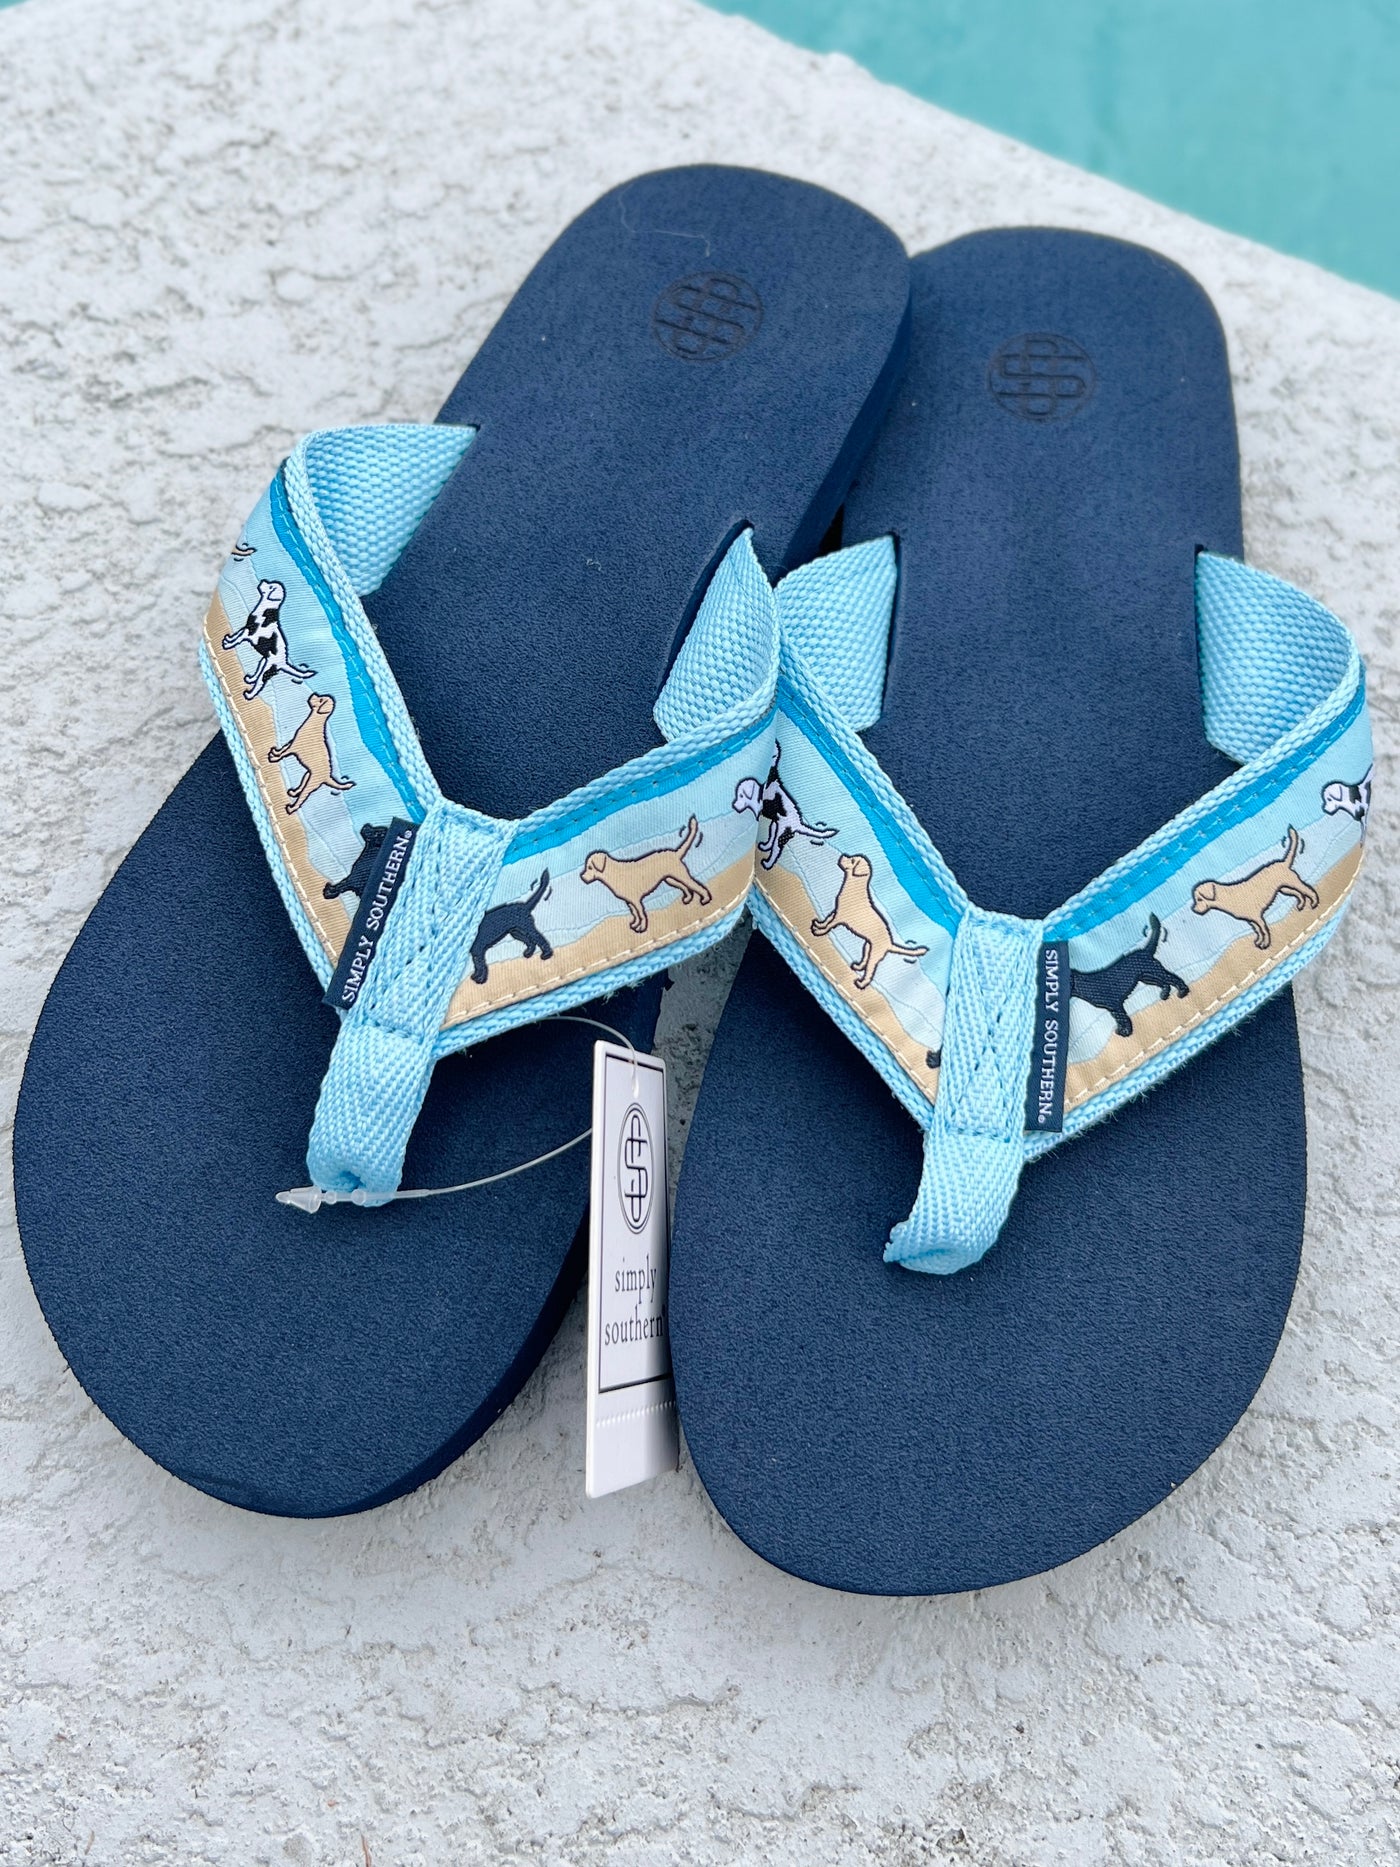 Flip Flops By Simply Southern